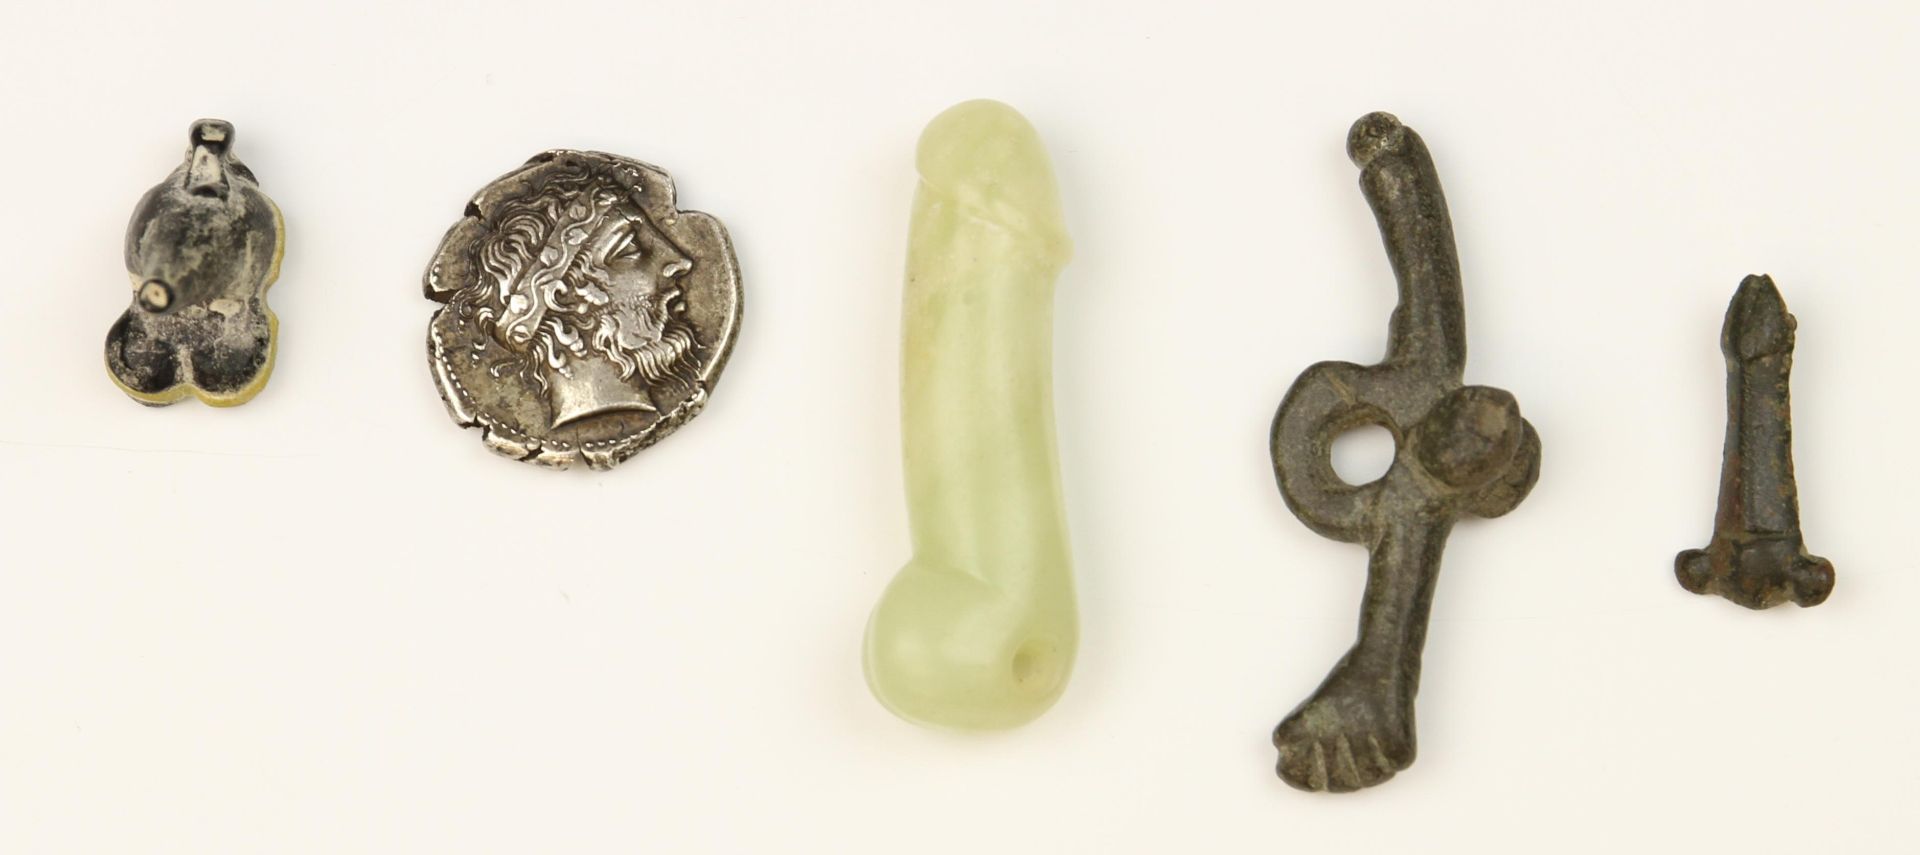 An antique bronze double phallus, possibly Roman and an antique small phallus amulet